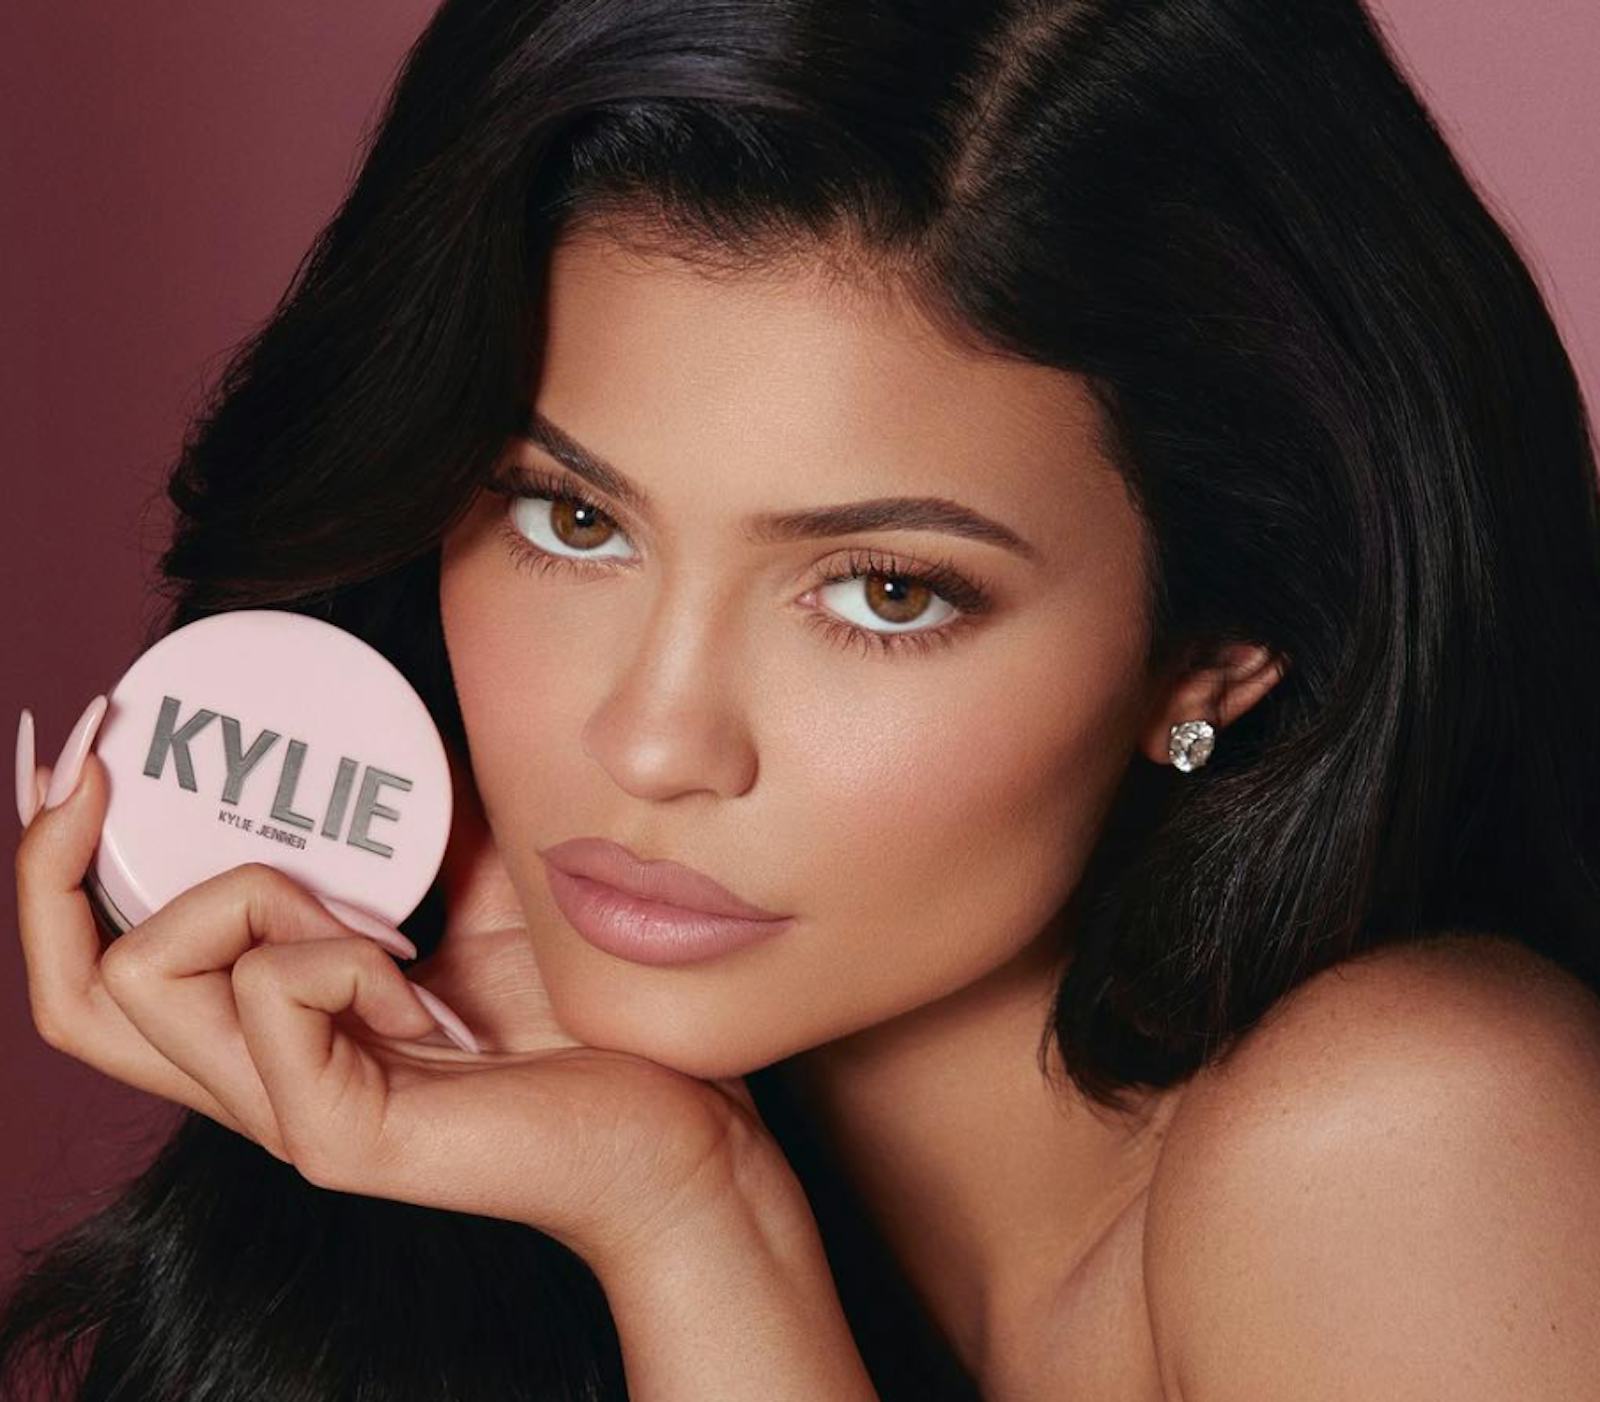 When To Buy Kylie Cosmetics' Setting Powders Because The New Product Is